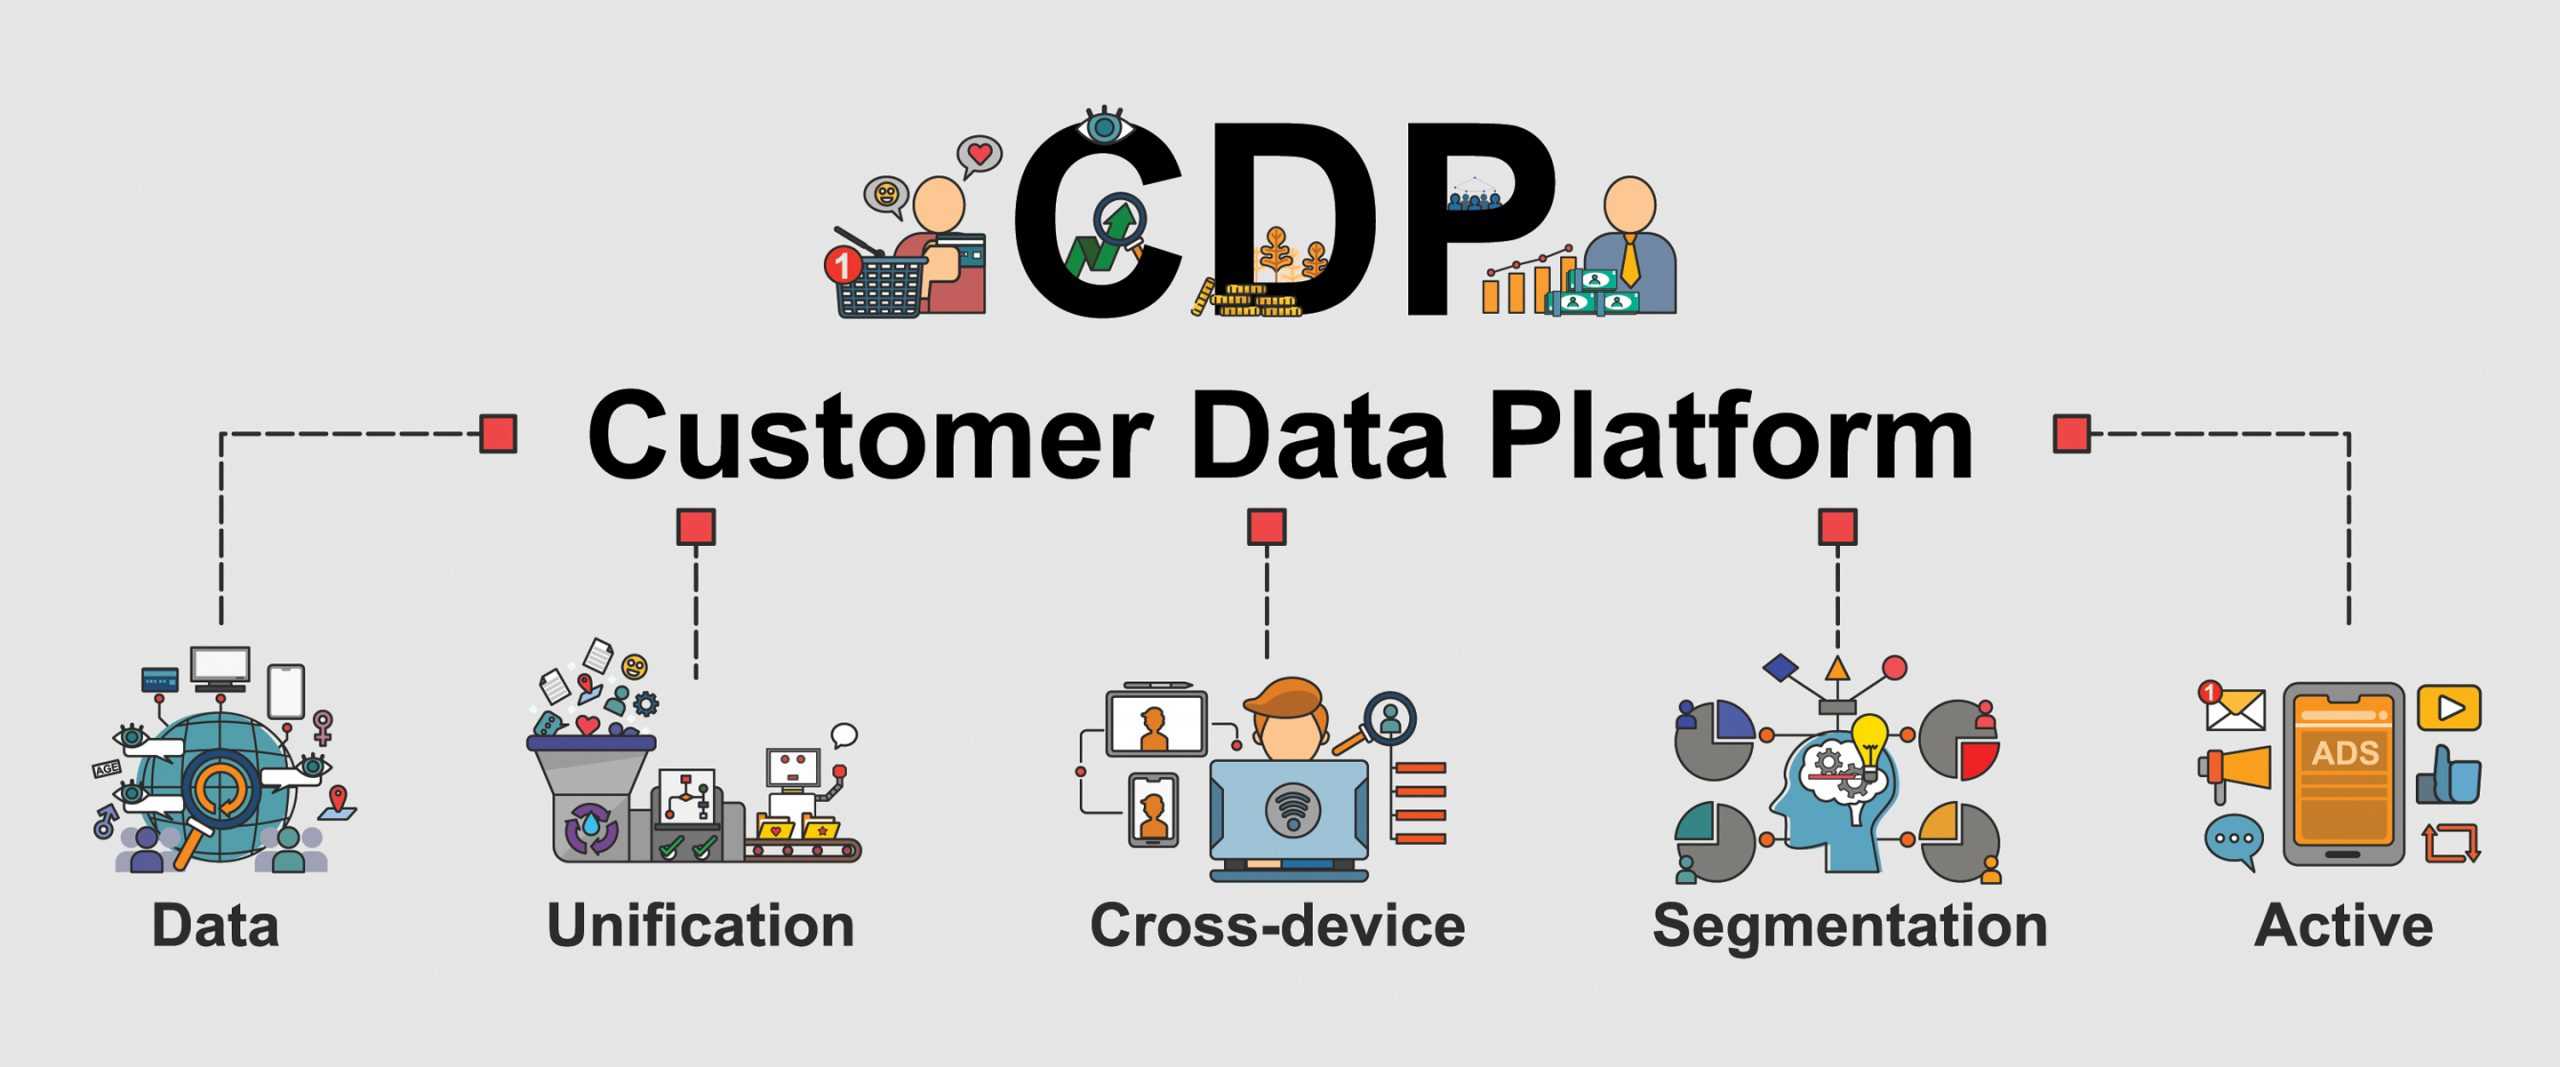 CDPs vital for getting value out of customer data